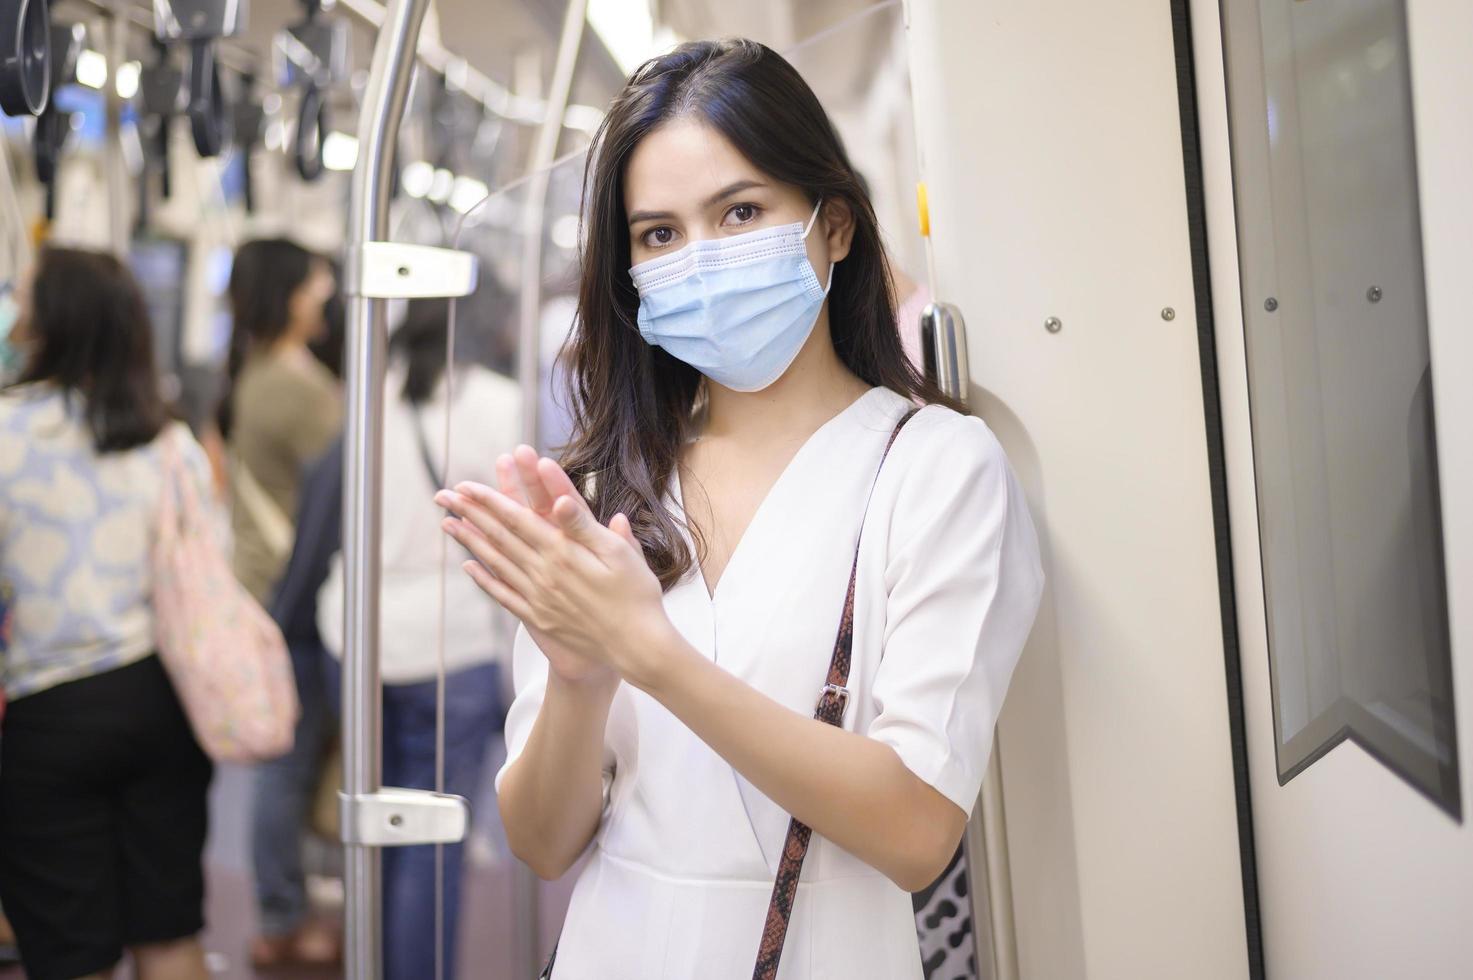 A young woman wearing protective mask in subway is using alcohol to wash hands, travel under Covid-19 pandemic, safety travels, social distancing protocol, New normal travel concept photo